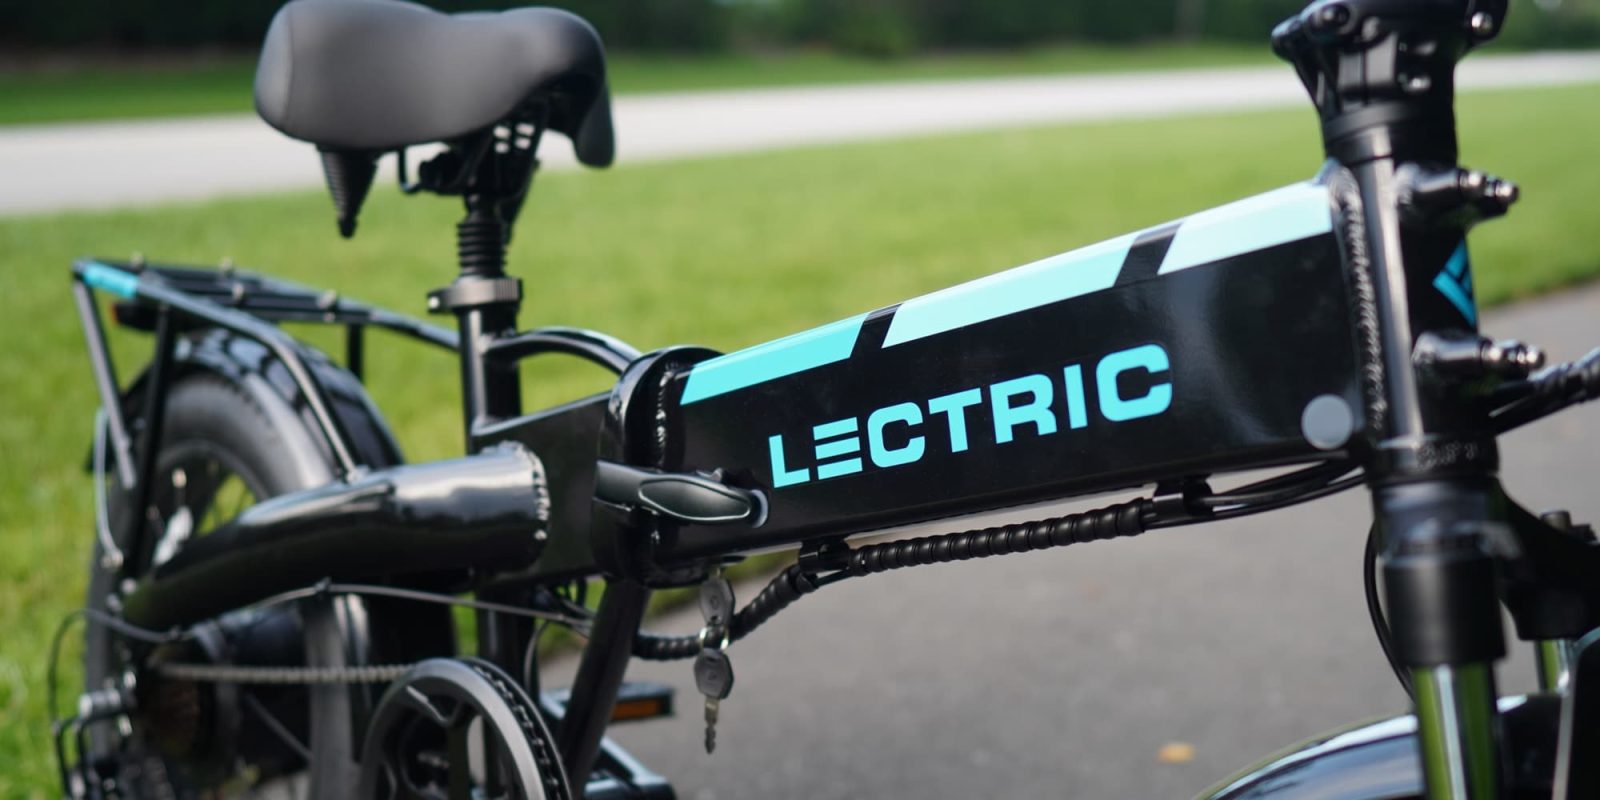 lectric ebikes rose to the top of sales, and now they are giving it all away